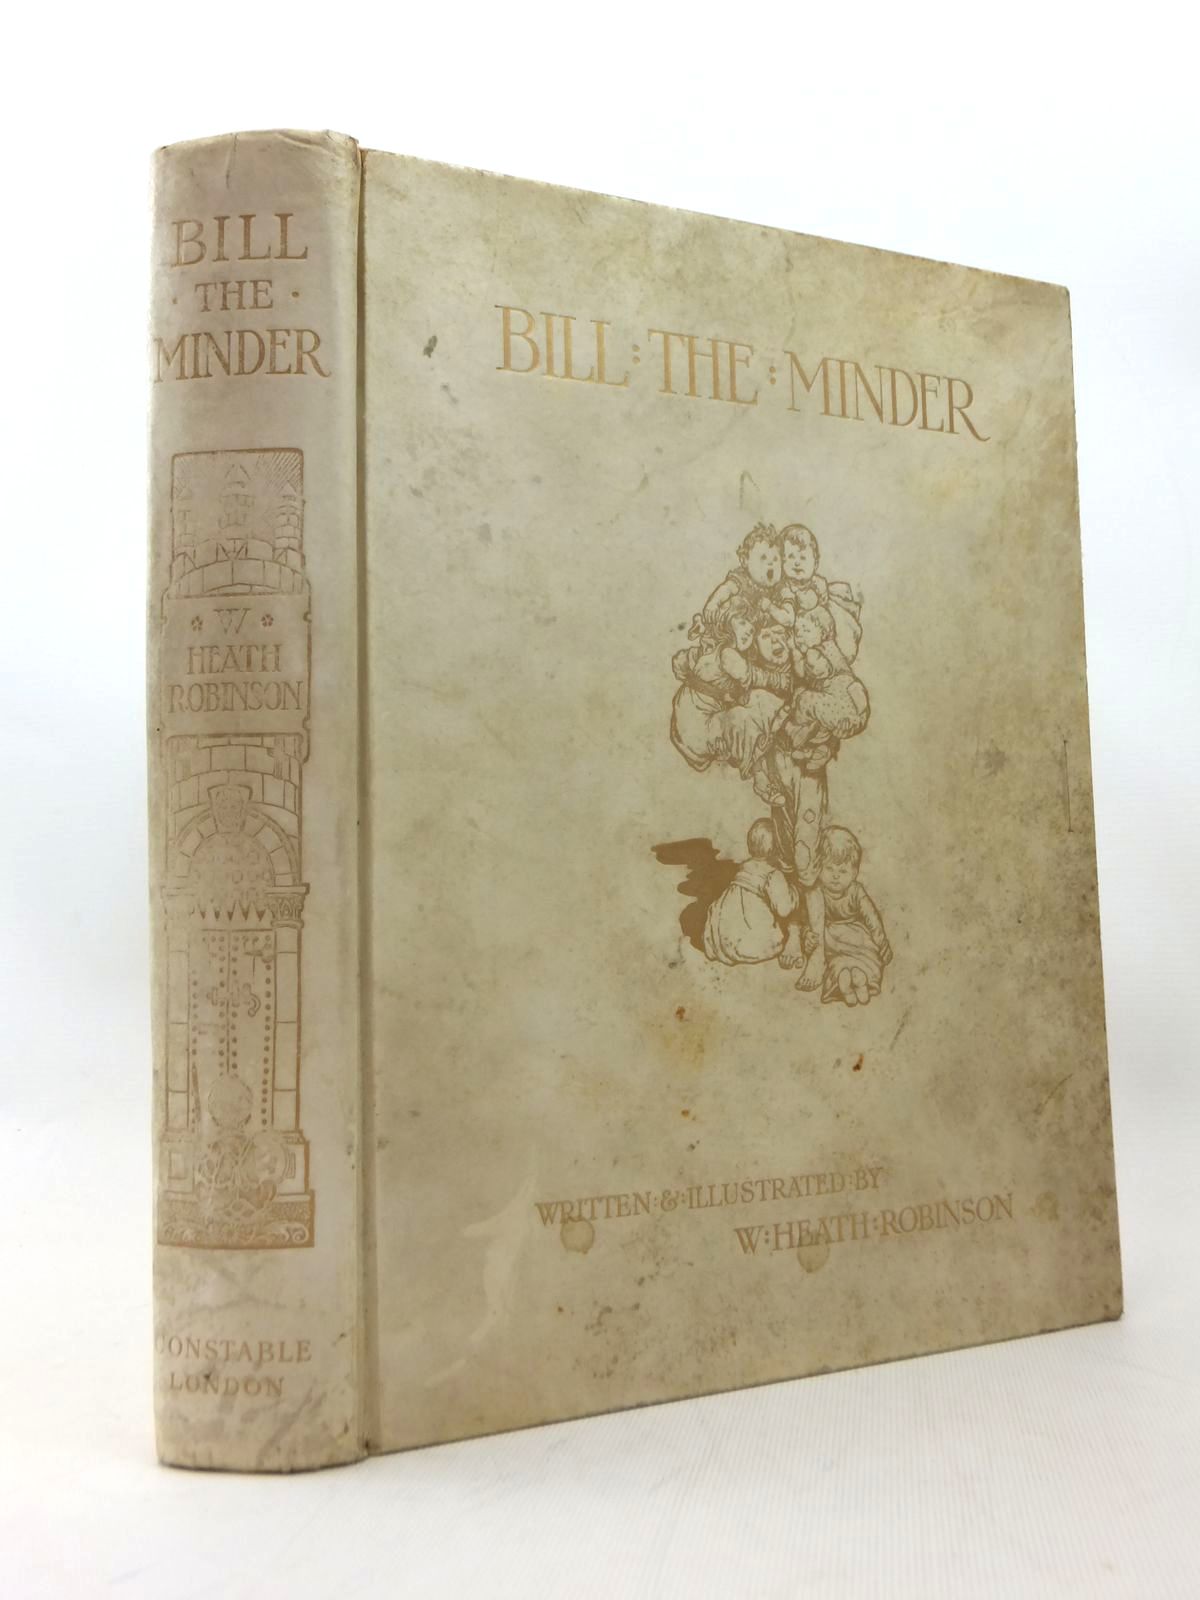 Photo of BILL THE MINDER written by Robinson, W. Heath illustrated by Robinson, W. Heath published by Constable and Company Ltd. (STOCK CODE: 1314202)  for sale by Stella & Rose's Books